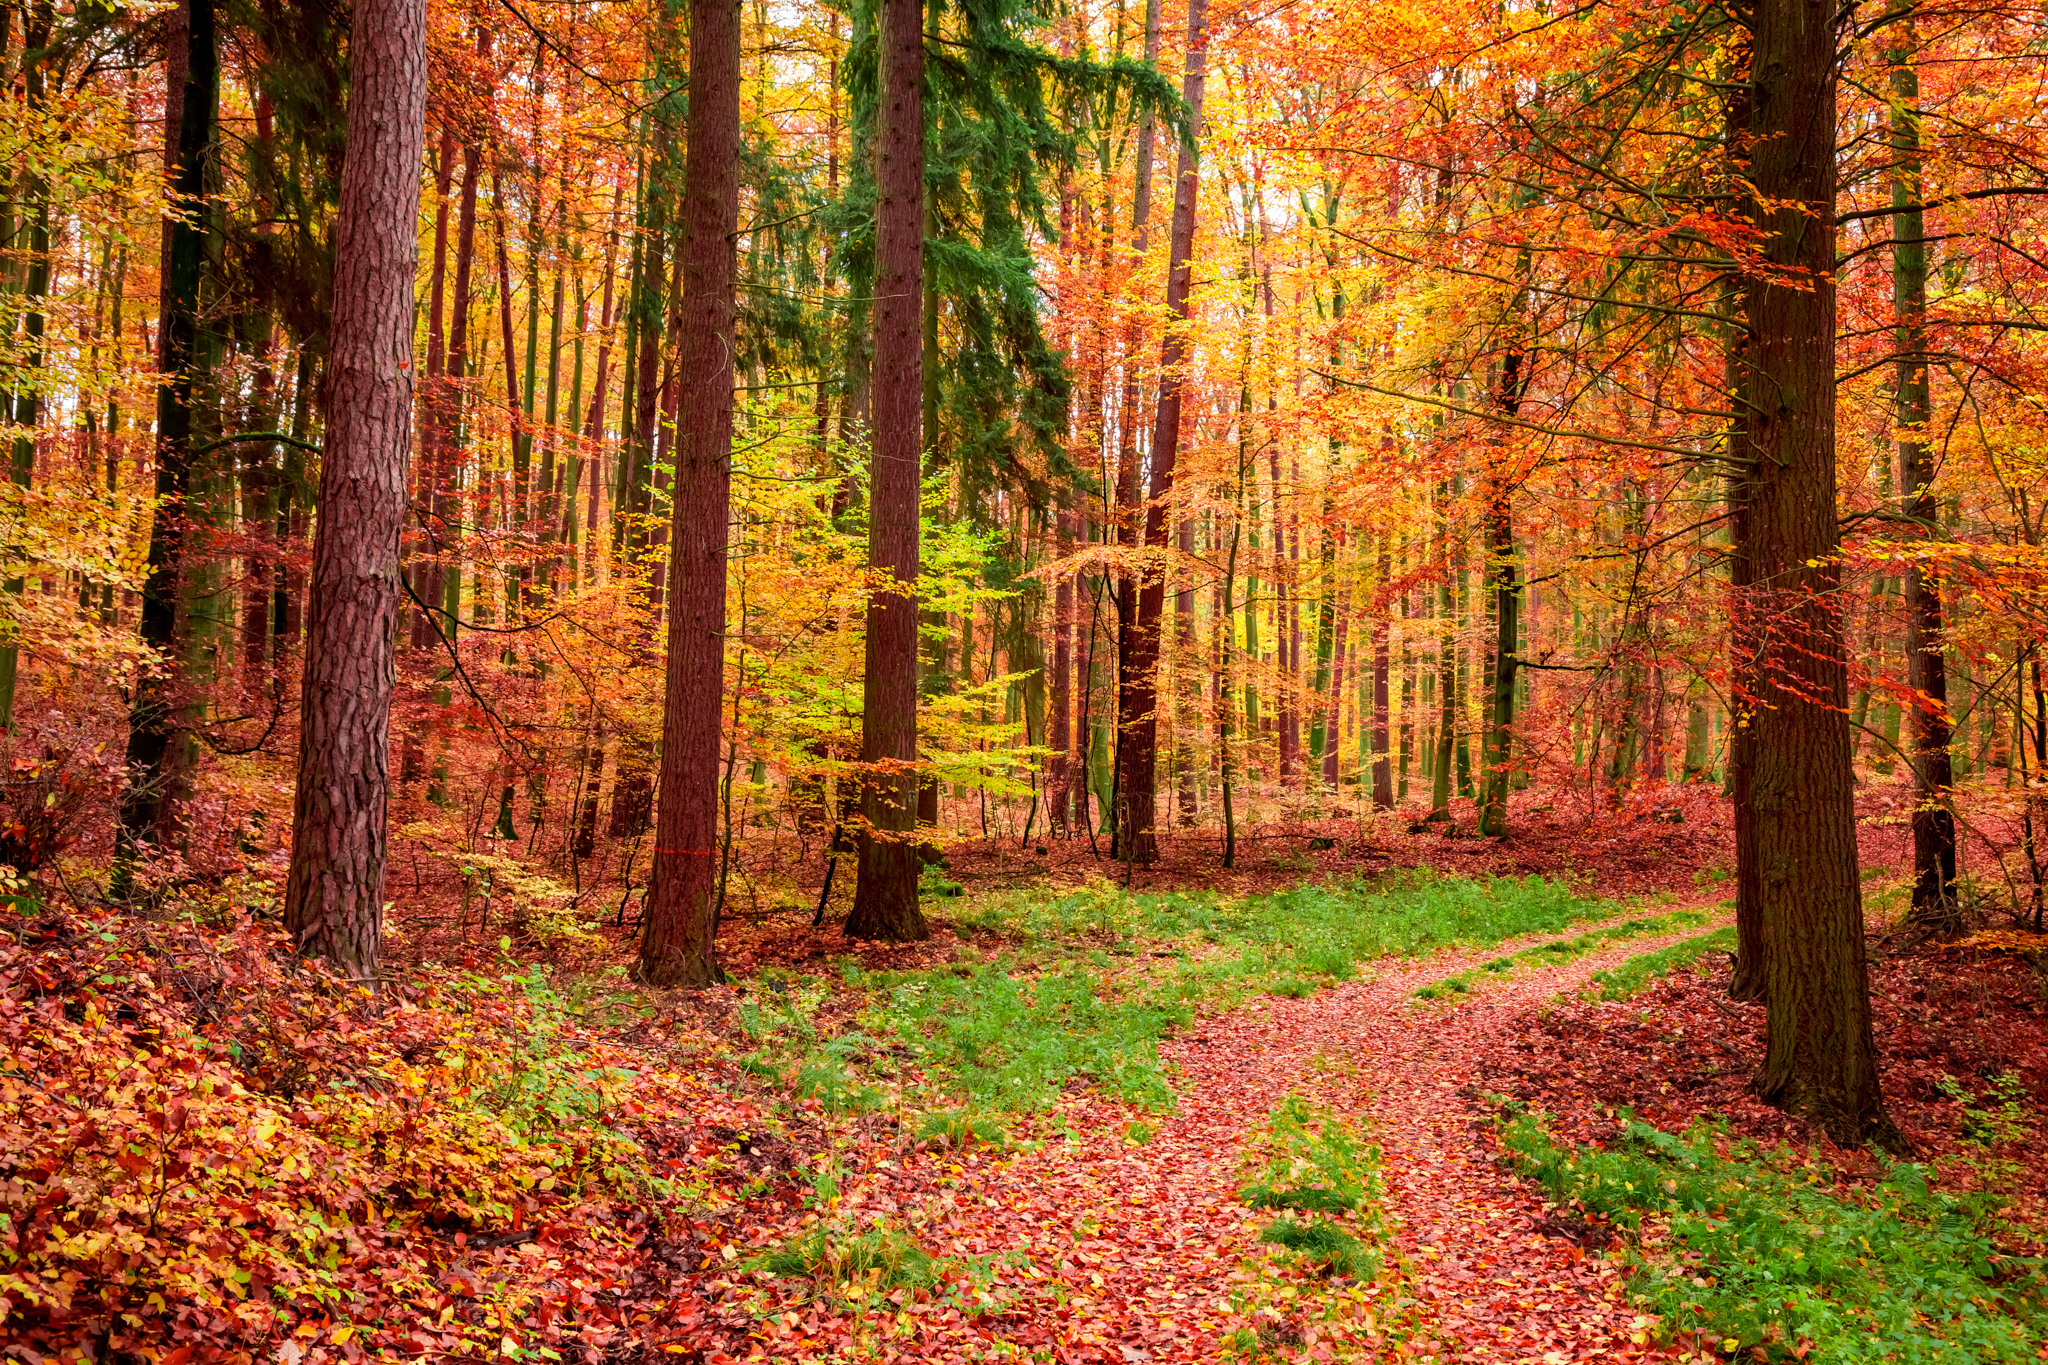 Path in a forest surrounded by trees the have changed color as fall has arrived.